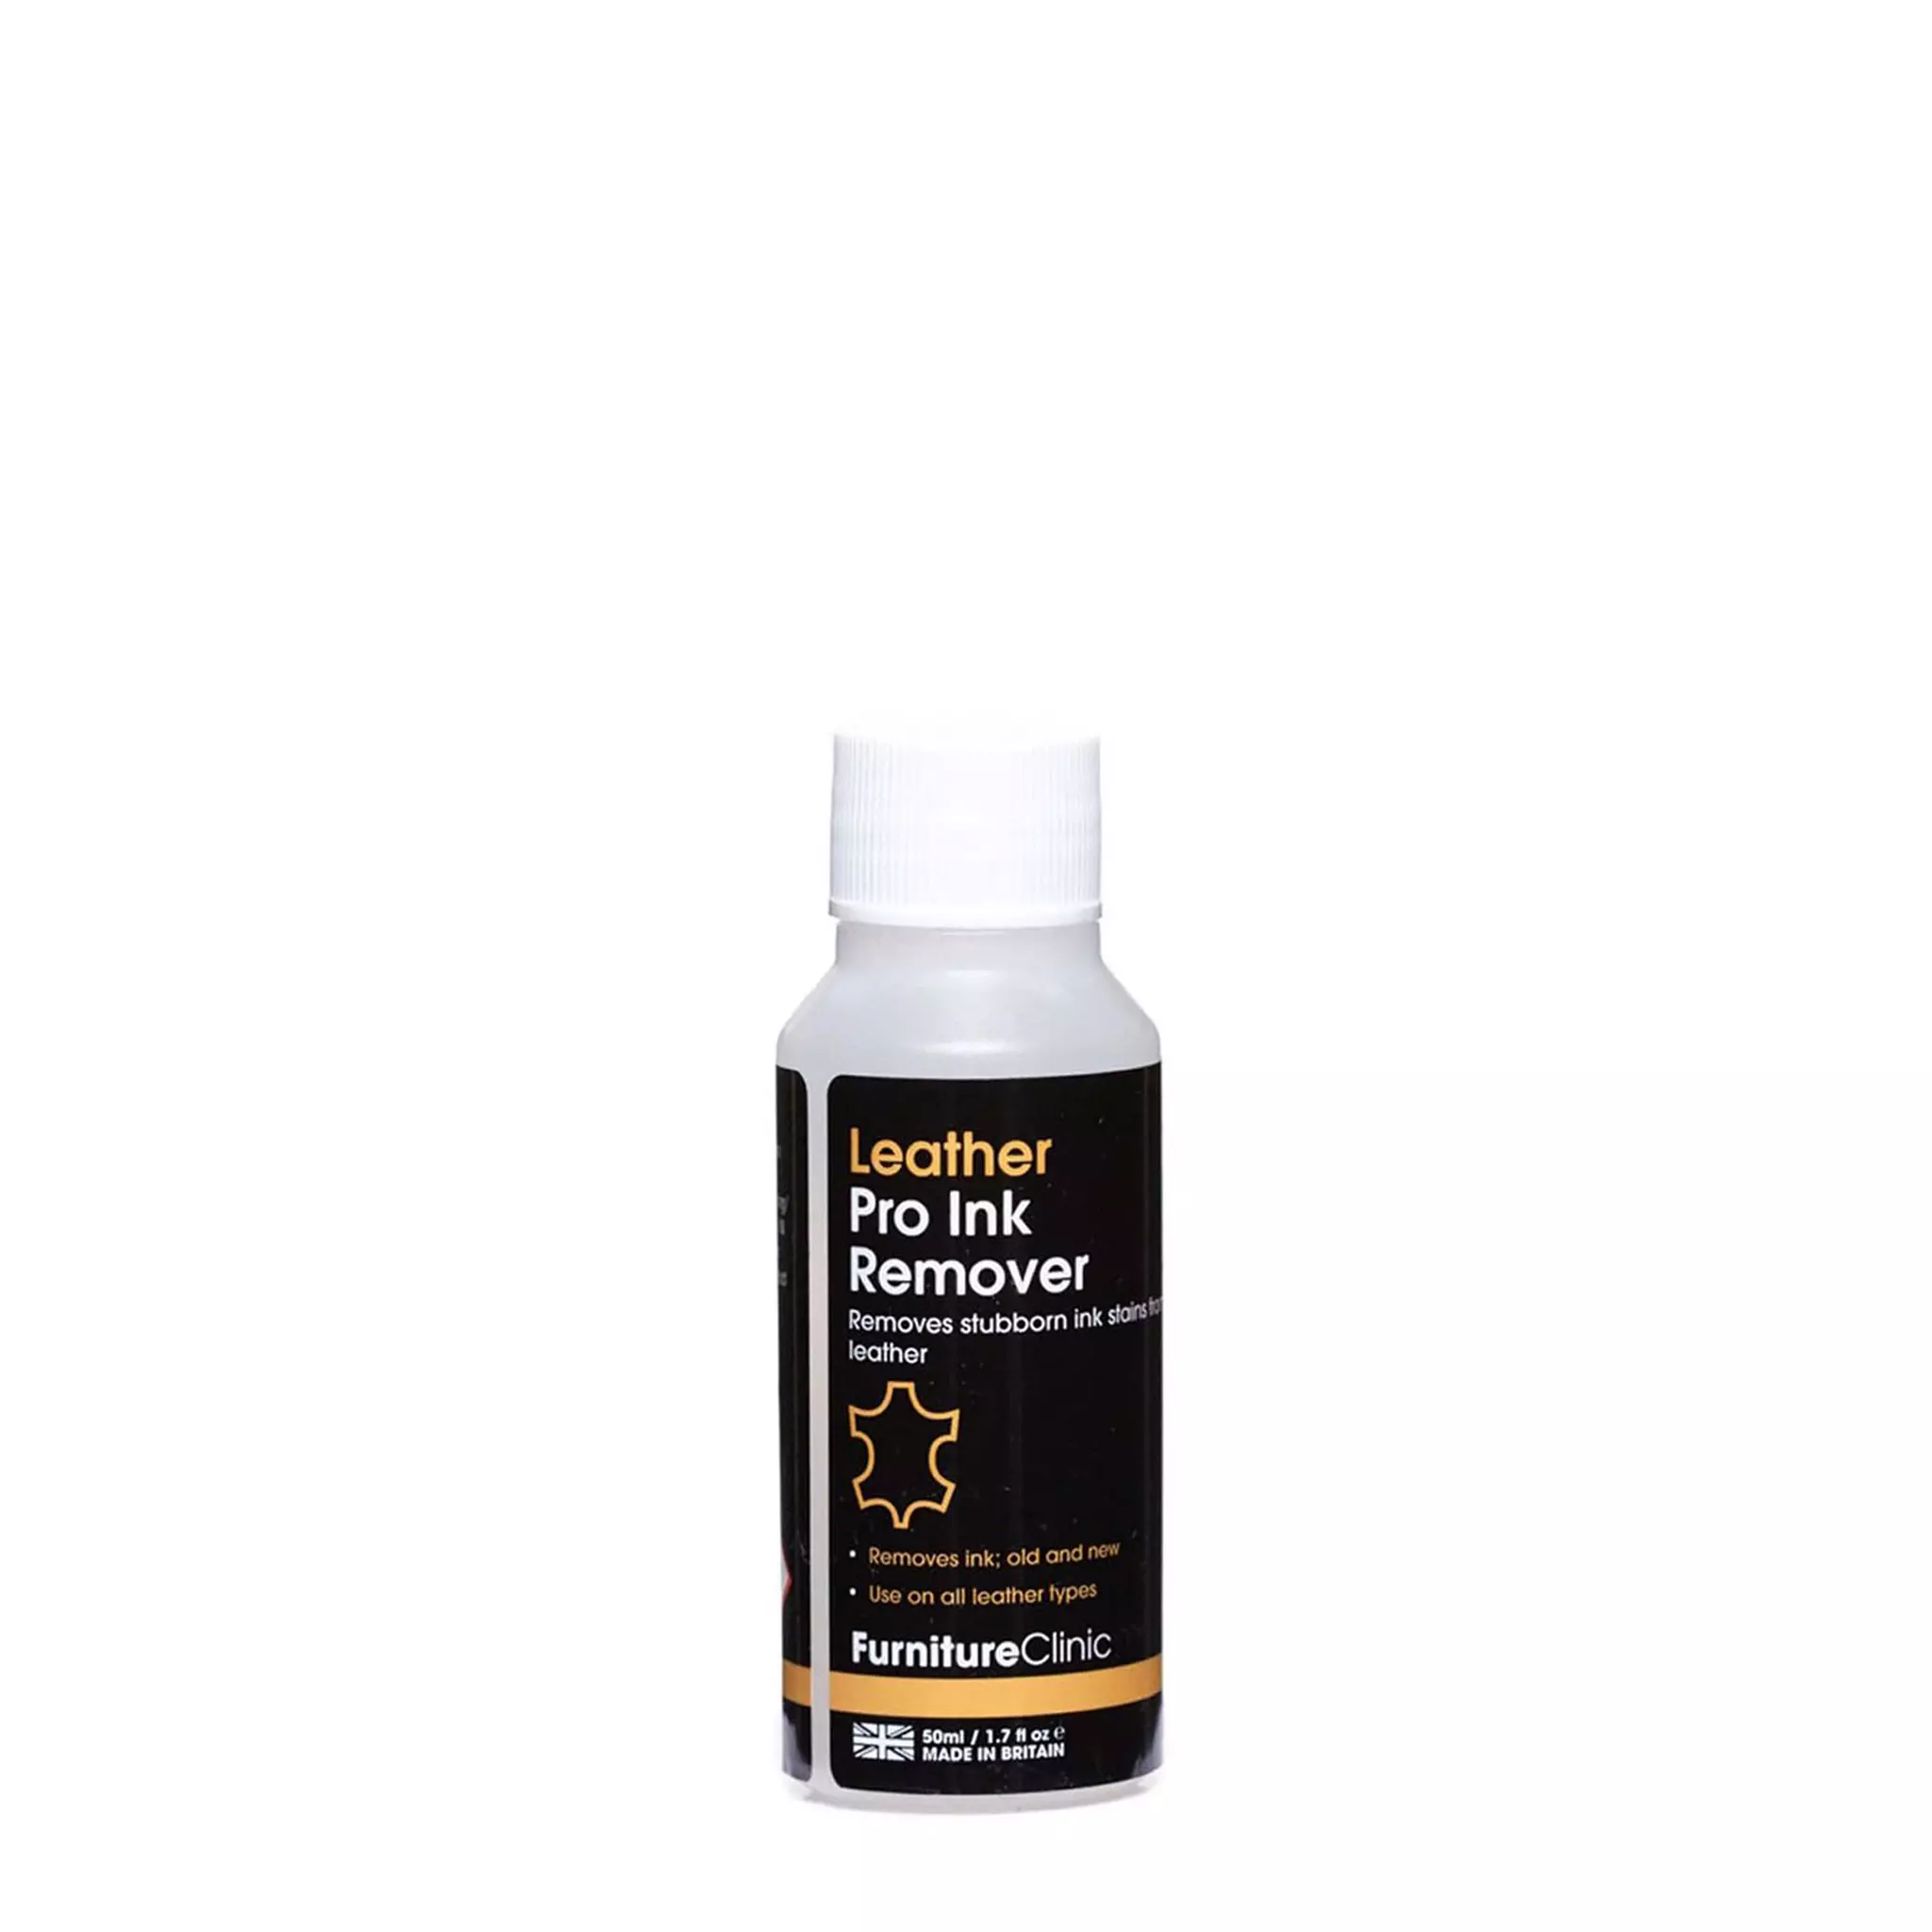 Musteenpoistoaine Furniture Clinic Pro Ink Remover,